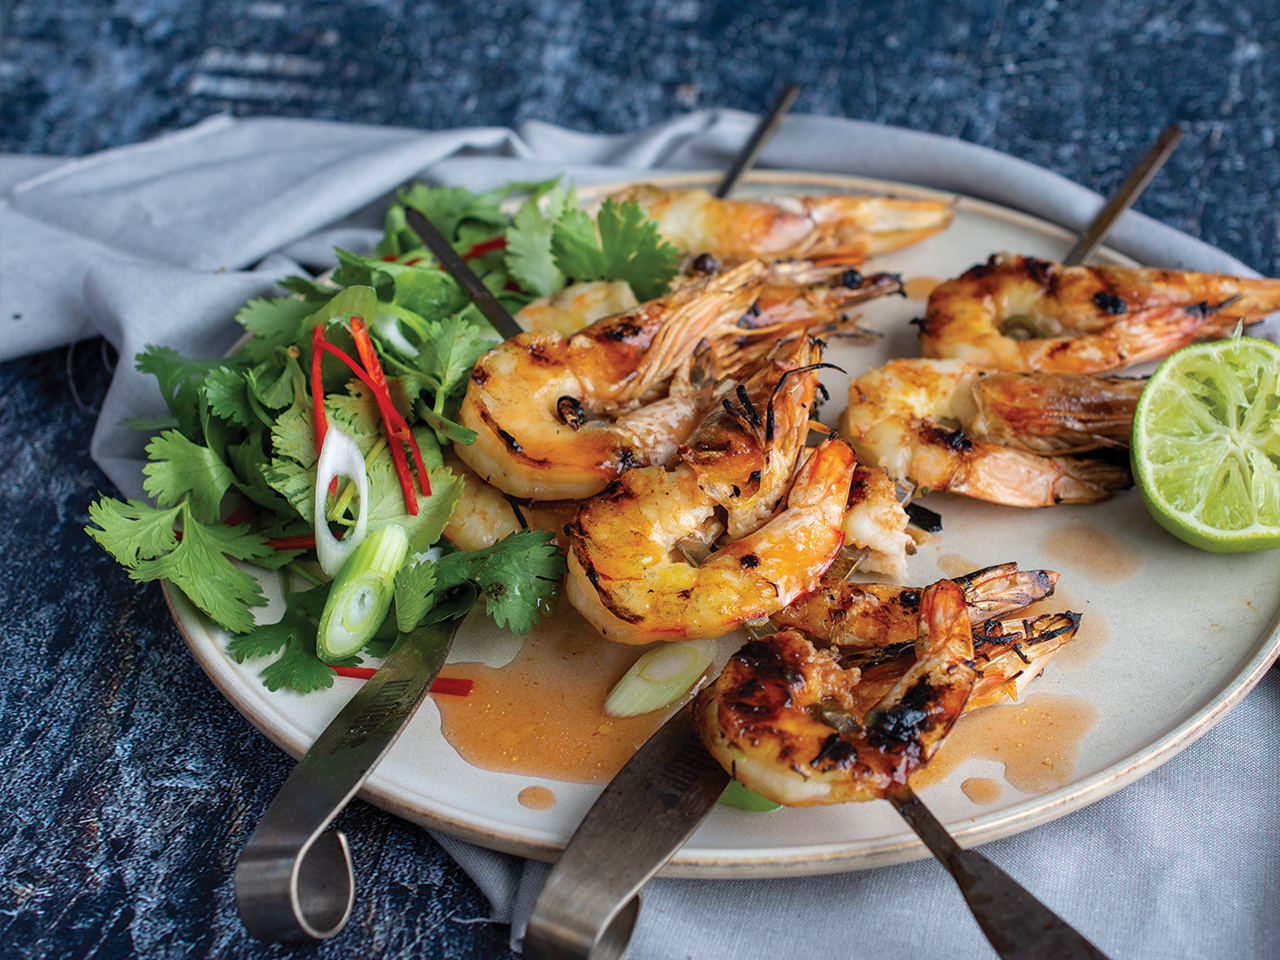  Barbecued Sweet and Sour Prawns 
  
